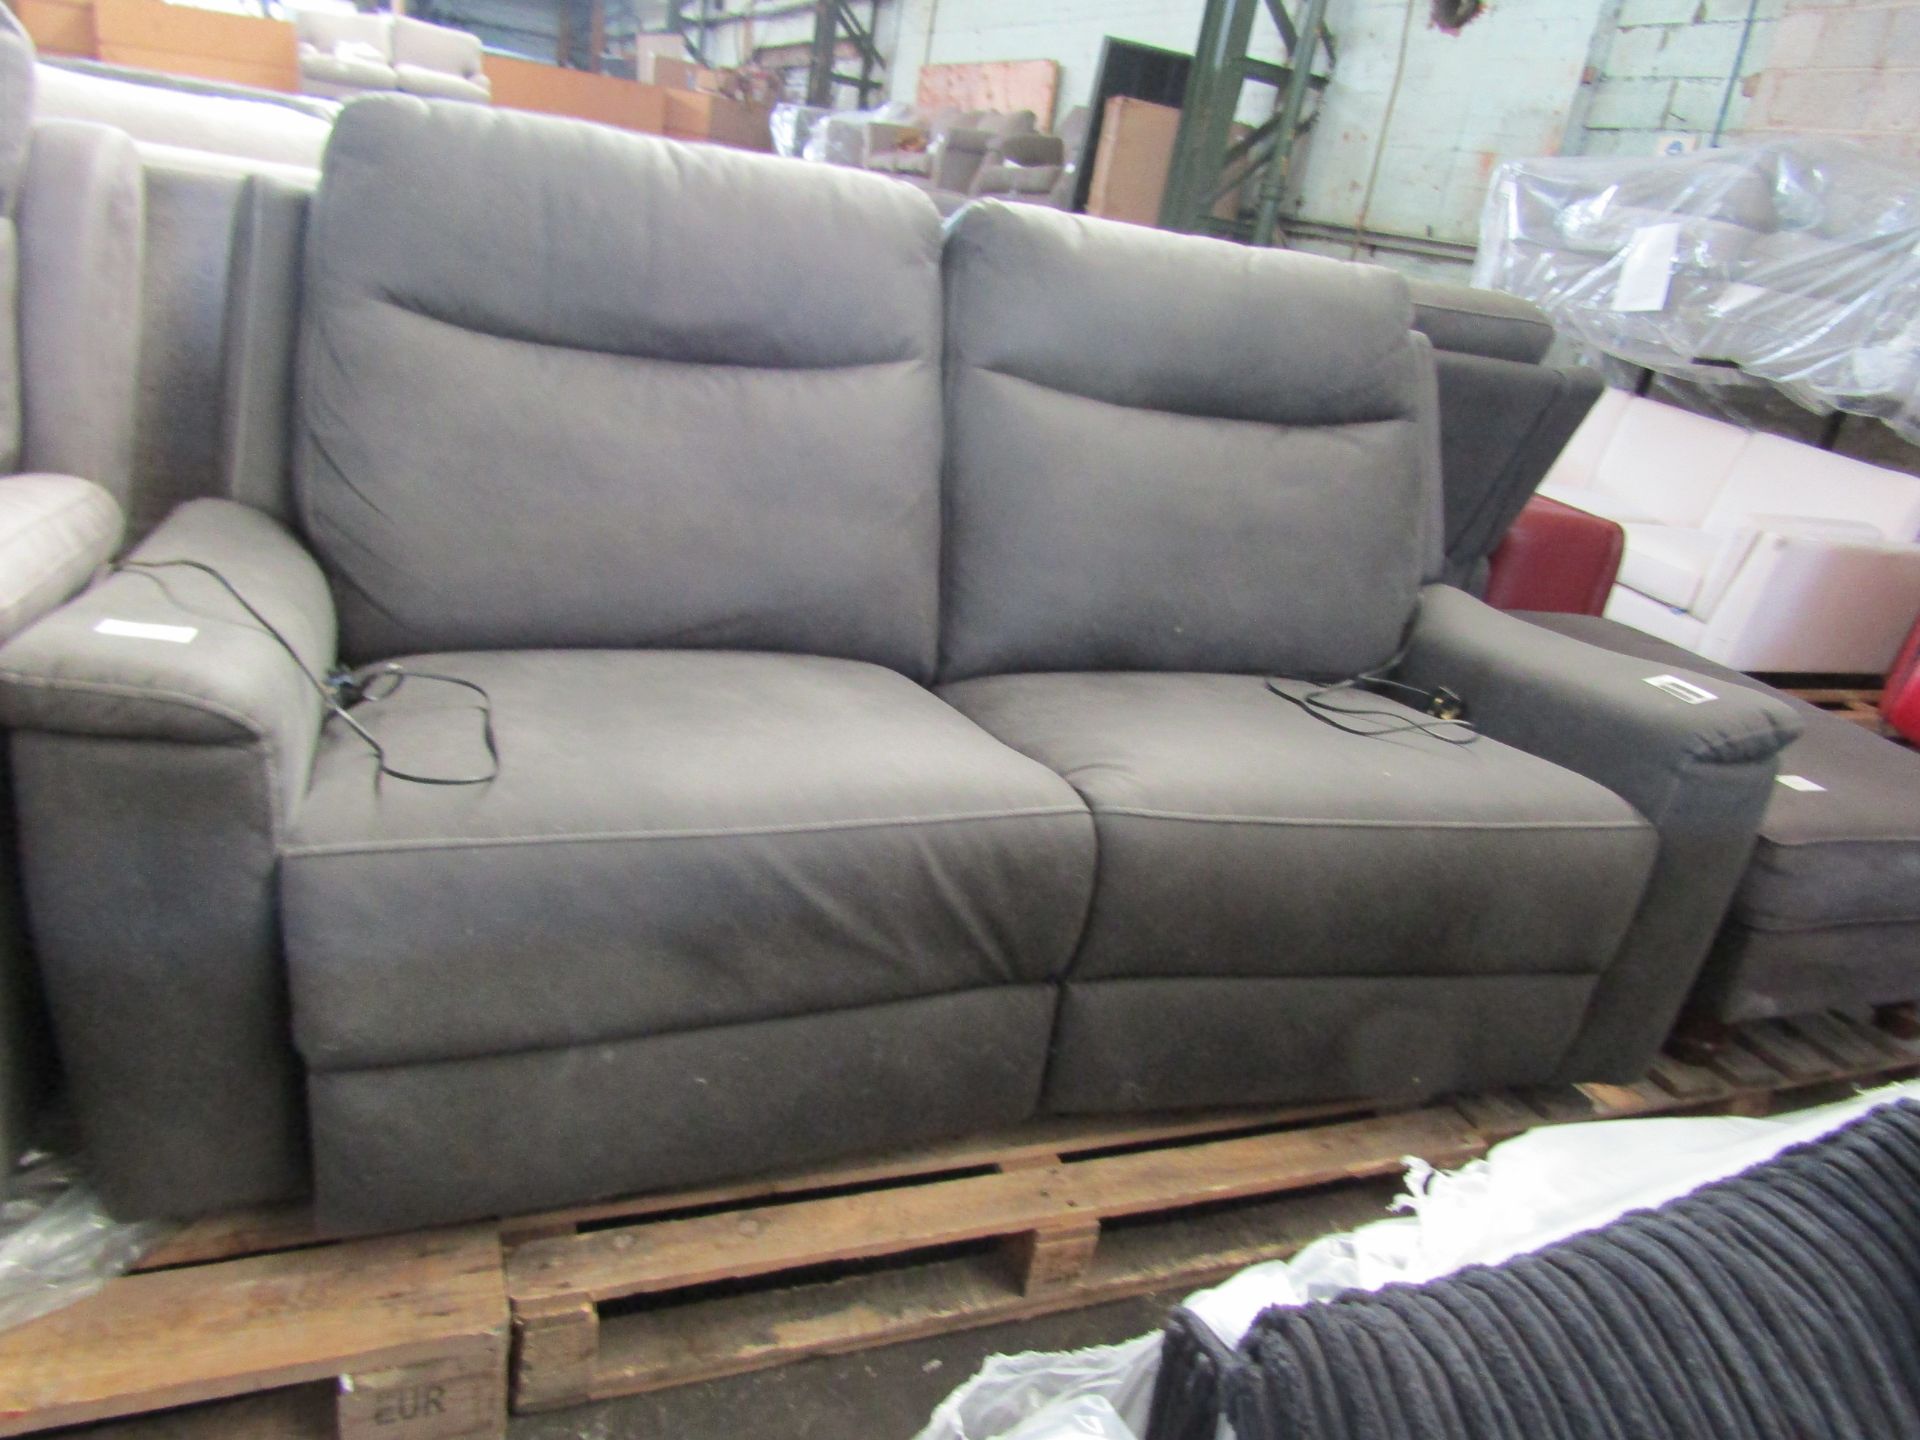 Morgan 3 Seater Power Recliner Grey Kuka Black Plastic Feet Kuka RRP 899 About the Product(s) - Image 2 of 2